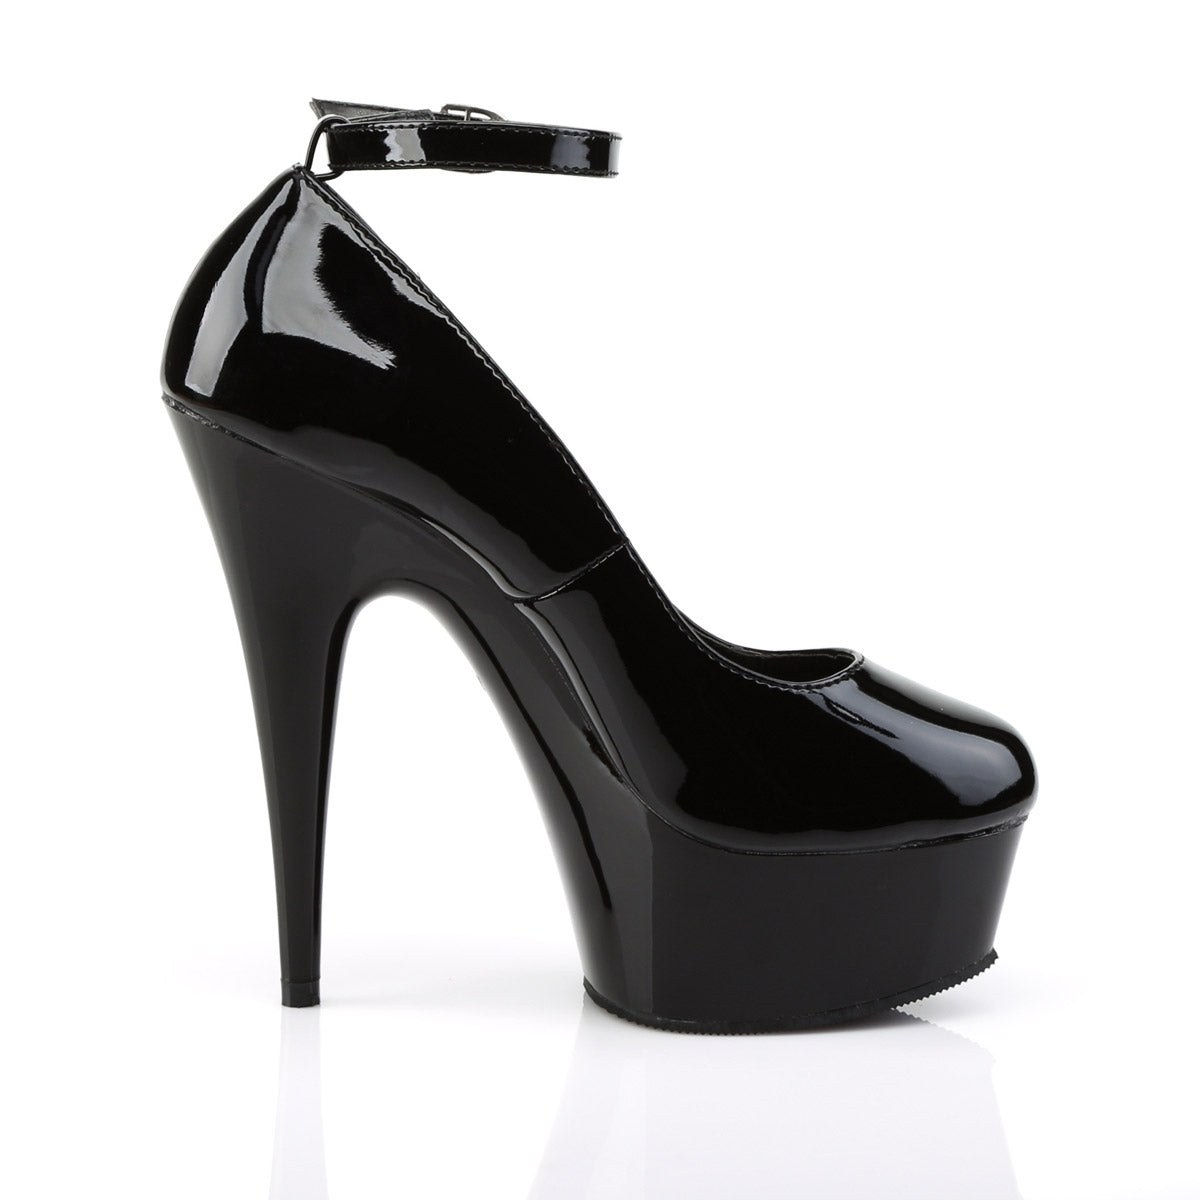 Womens High Heels Stiletto Pumps Sexy Shoes Platform Ankle Strap